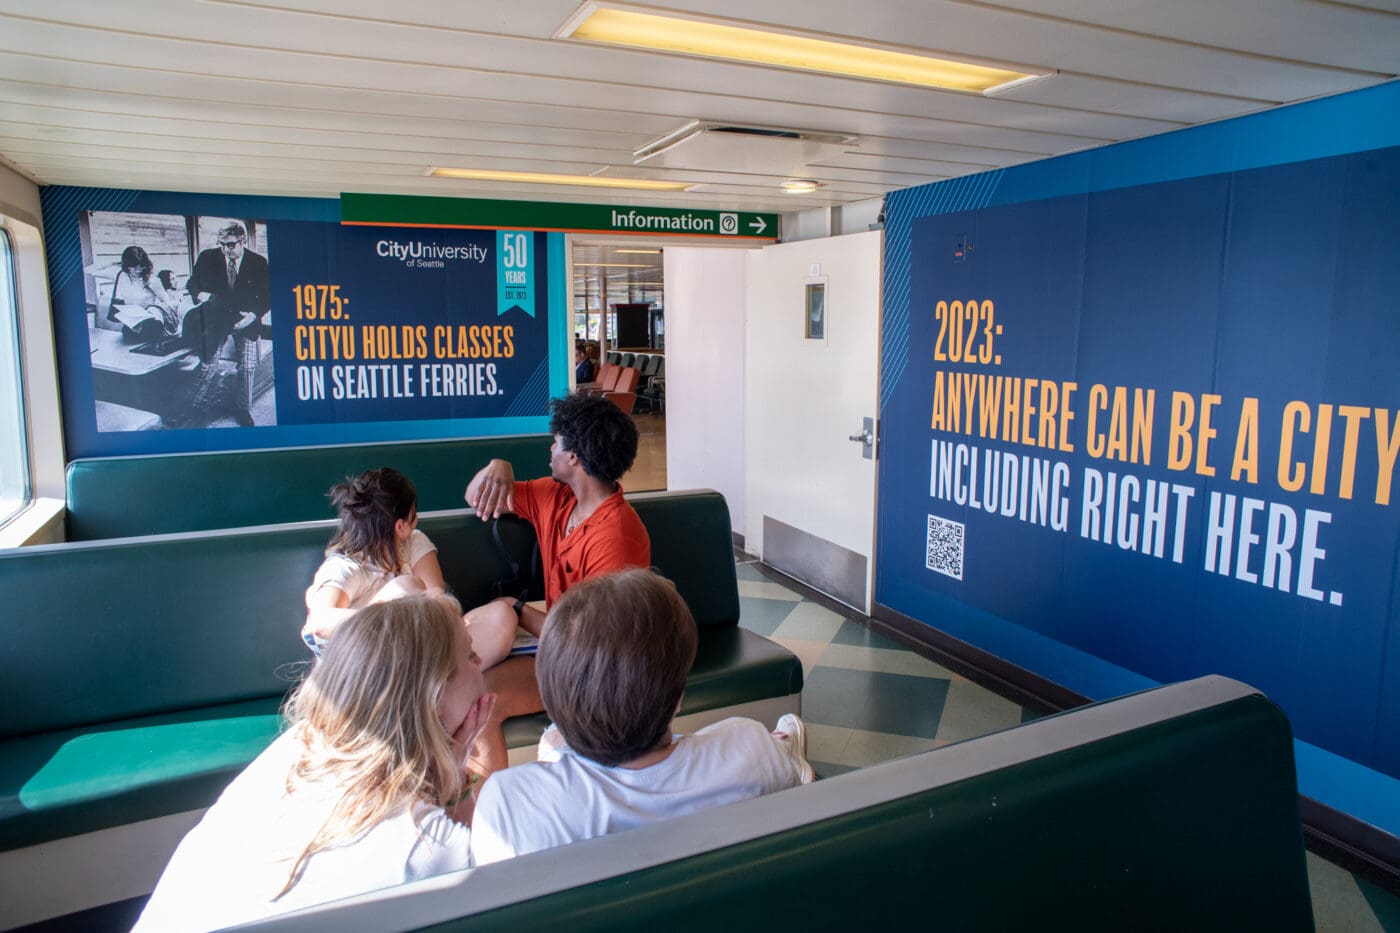 outdoor advertising on the Washington state ferry walls in Seattle displaying city university of Seattle